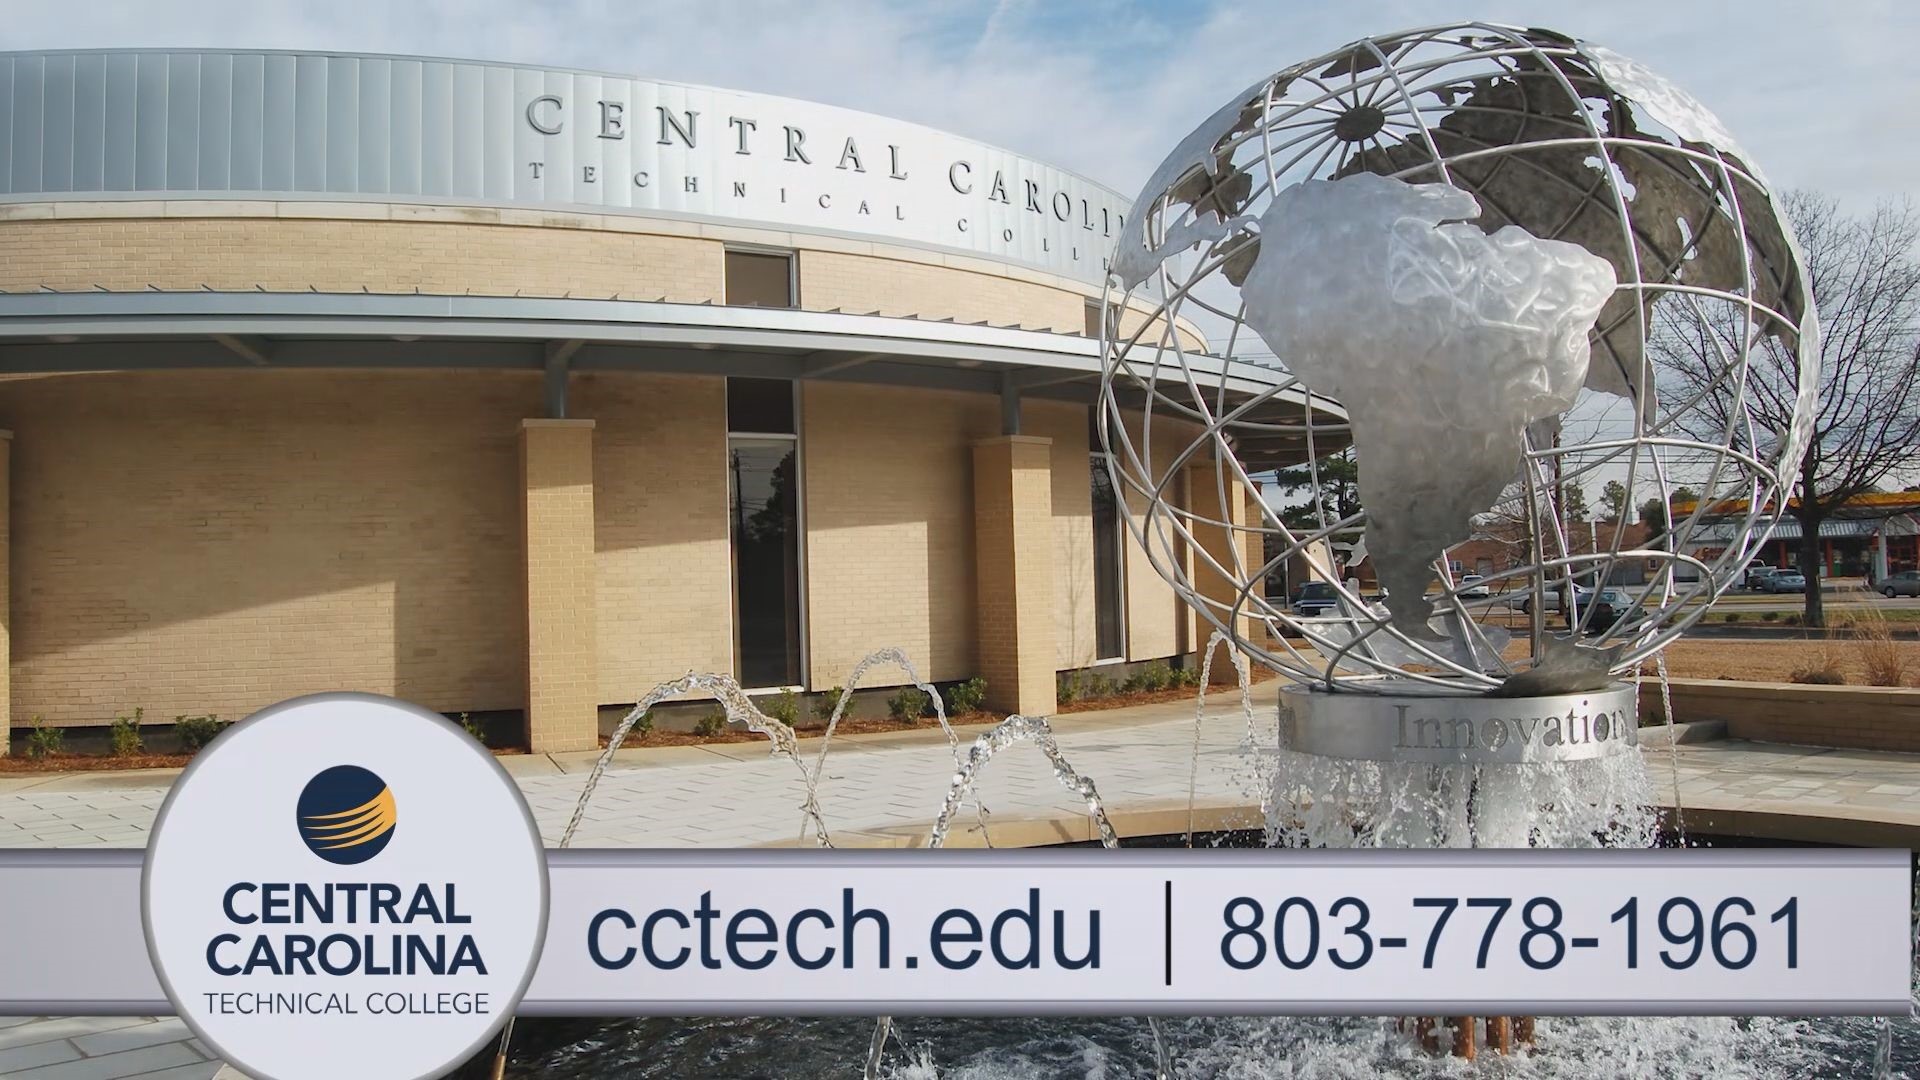 Central Carolina Technical College is a comprehensive, public, two-year institution of higher education dedicated to fostering a positive environment of teaching and learning for faculty, staff, and students.